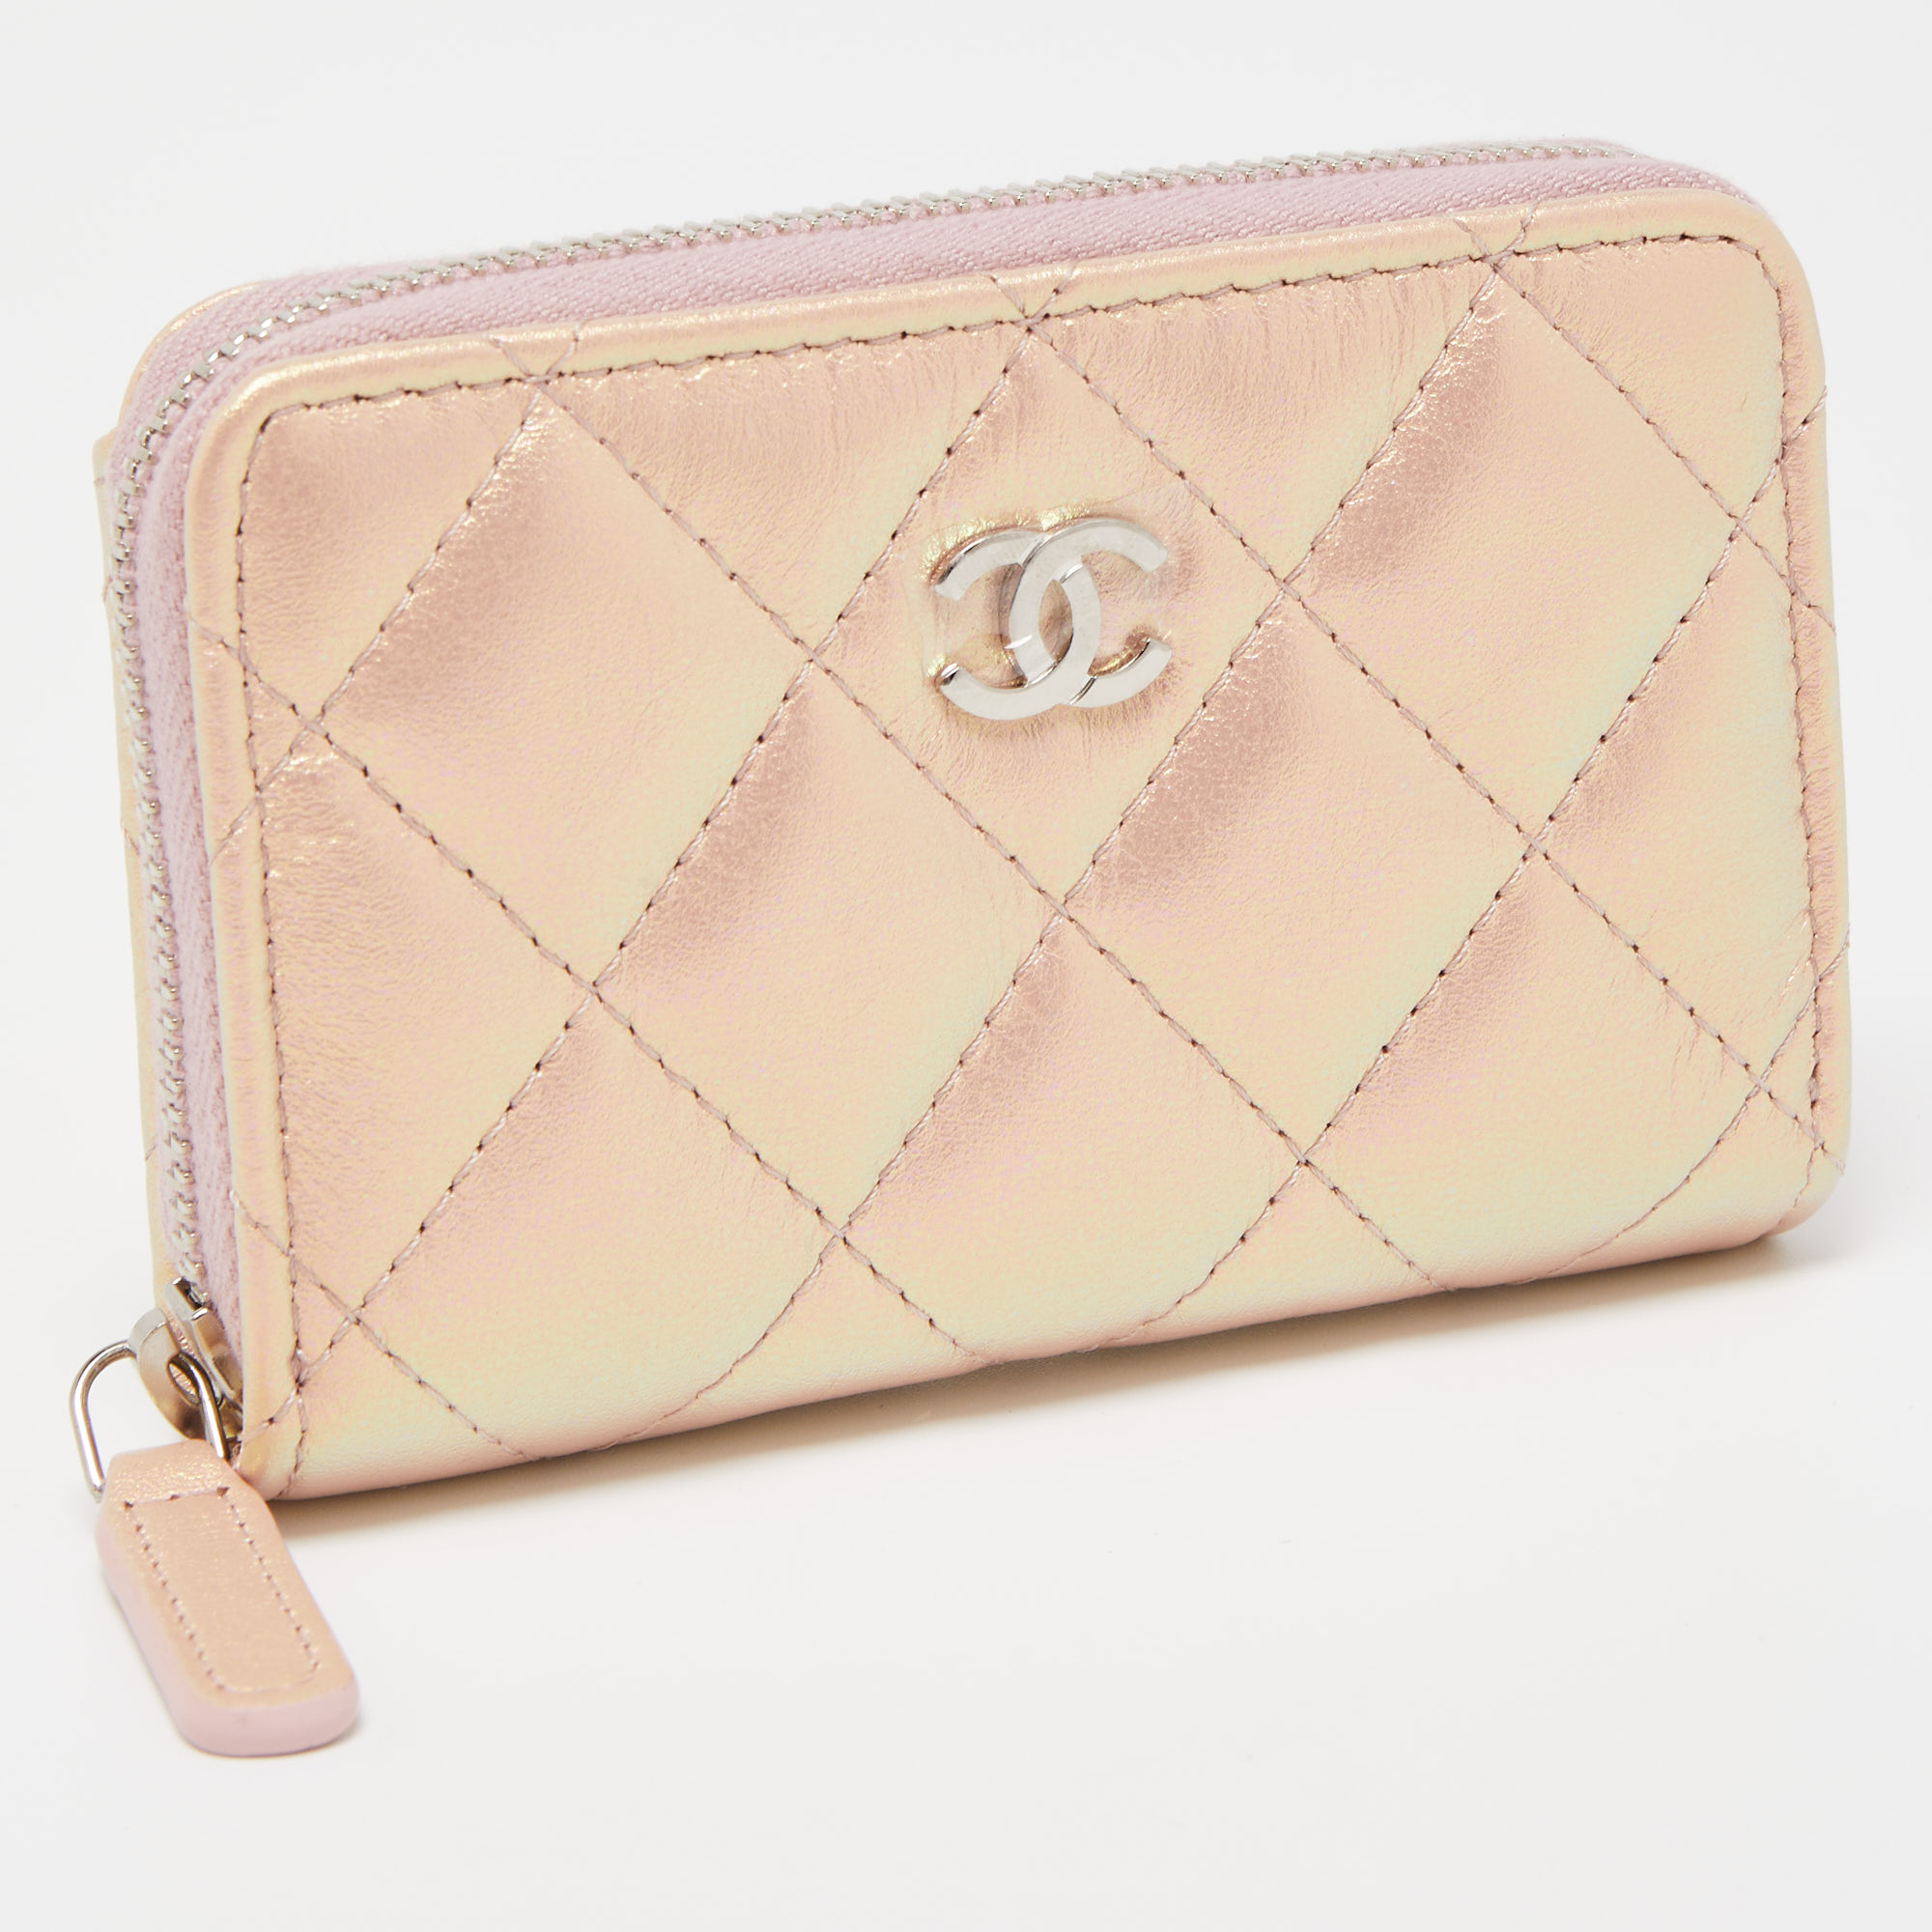 Chanel Pink Quilted Iridescent Leather CC Zip Coin Purse